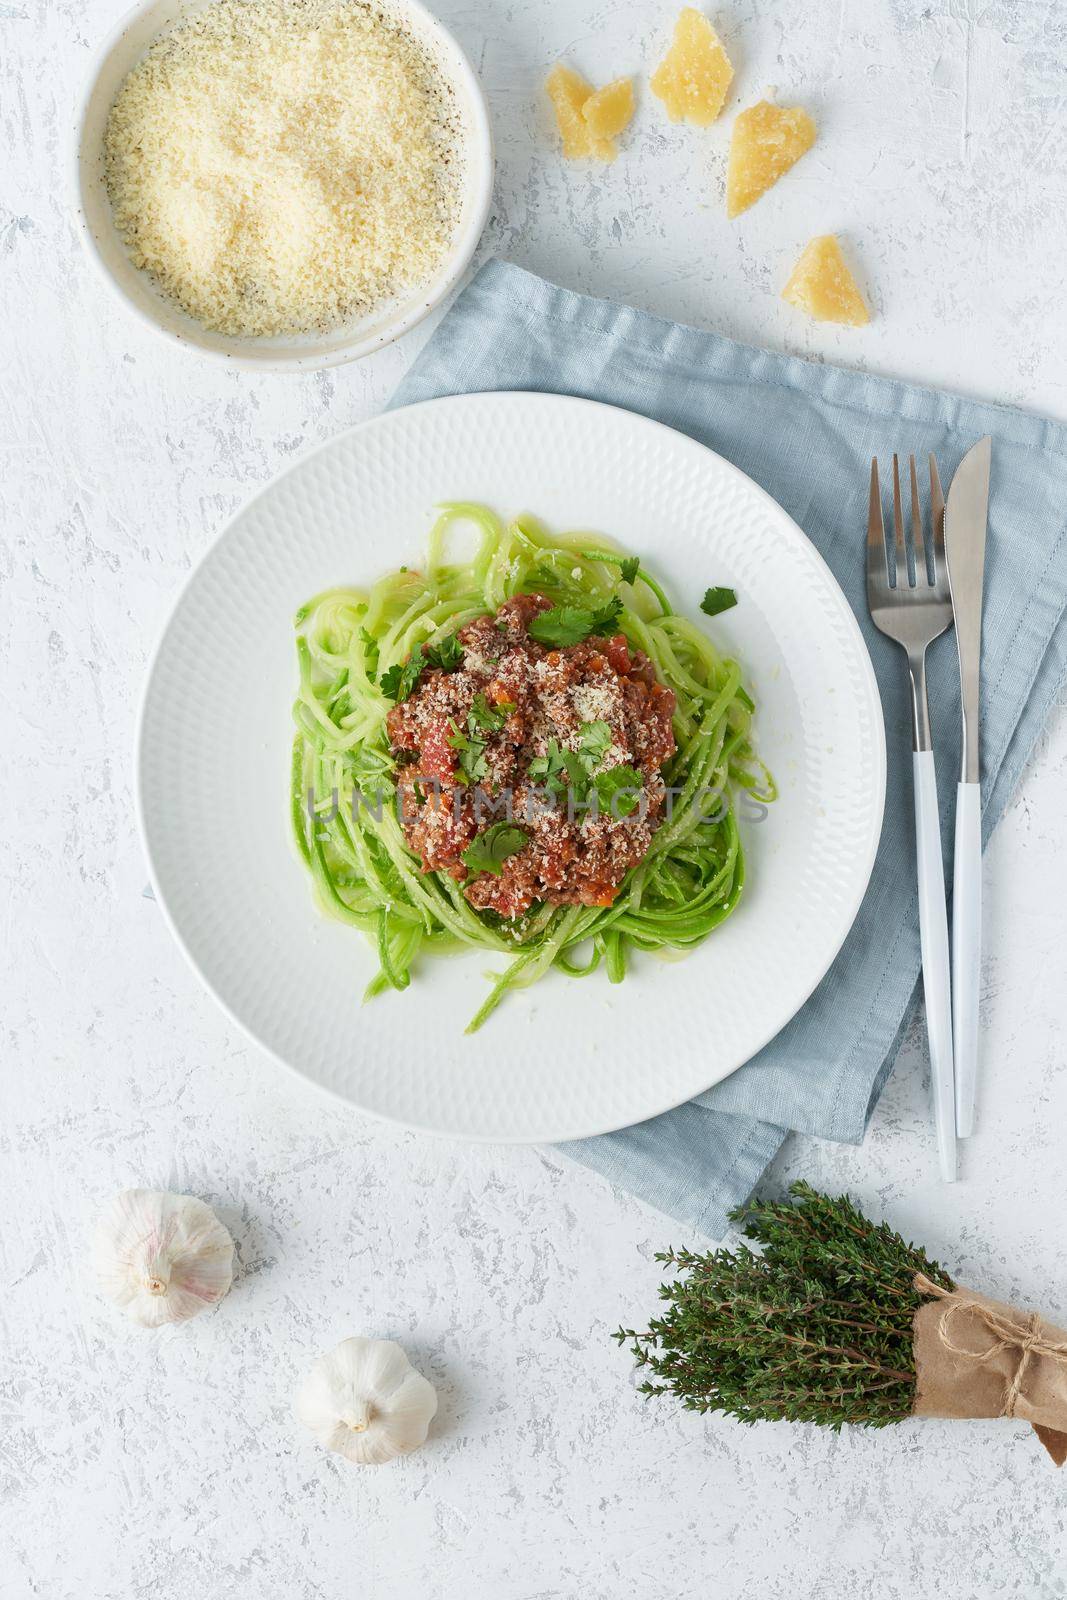 Keto pasta Bolognese with mincemeat and zucchini noodles, fodmap, lchf, low carb. Vertical by NataBene